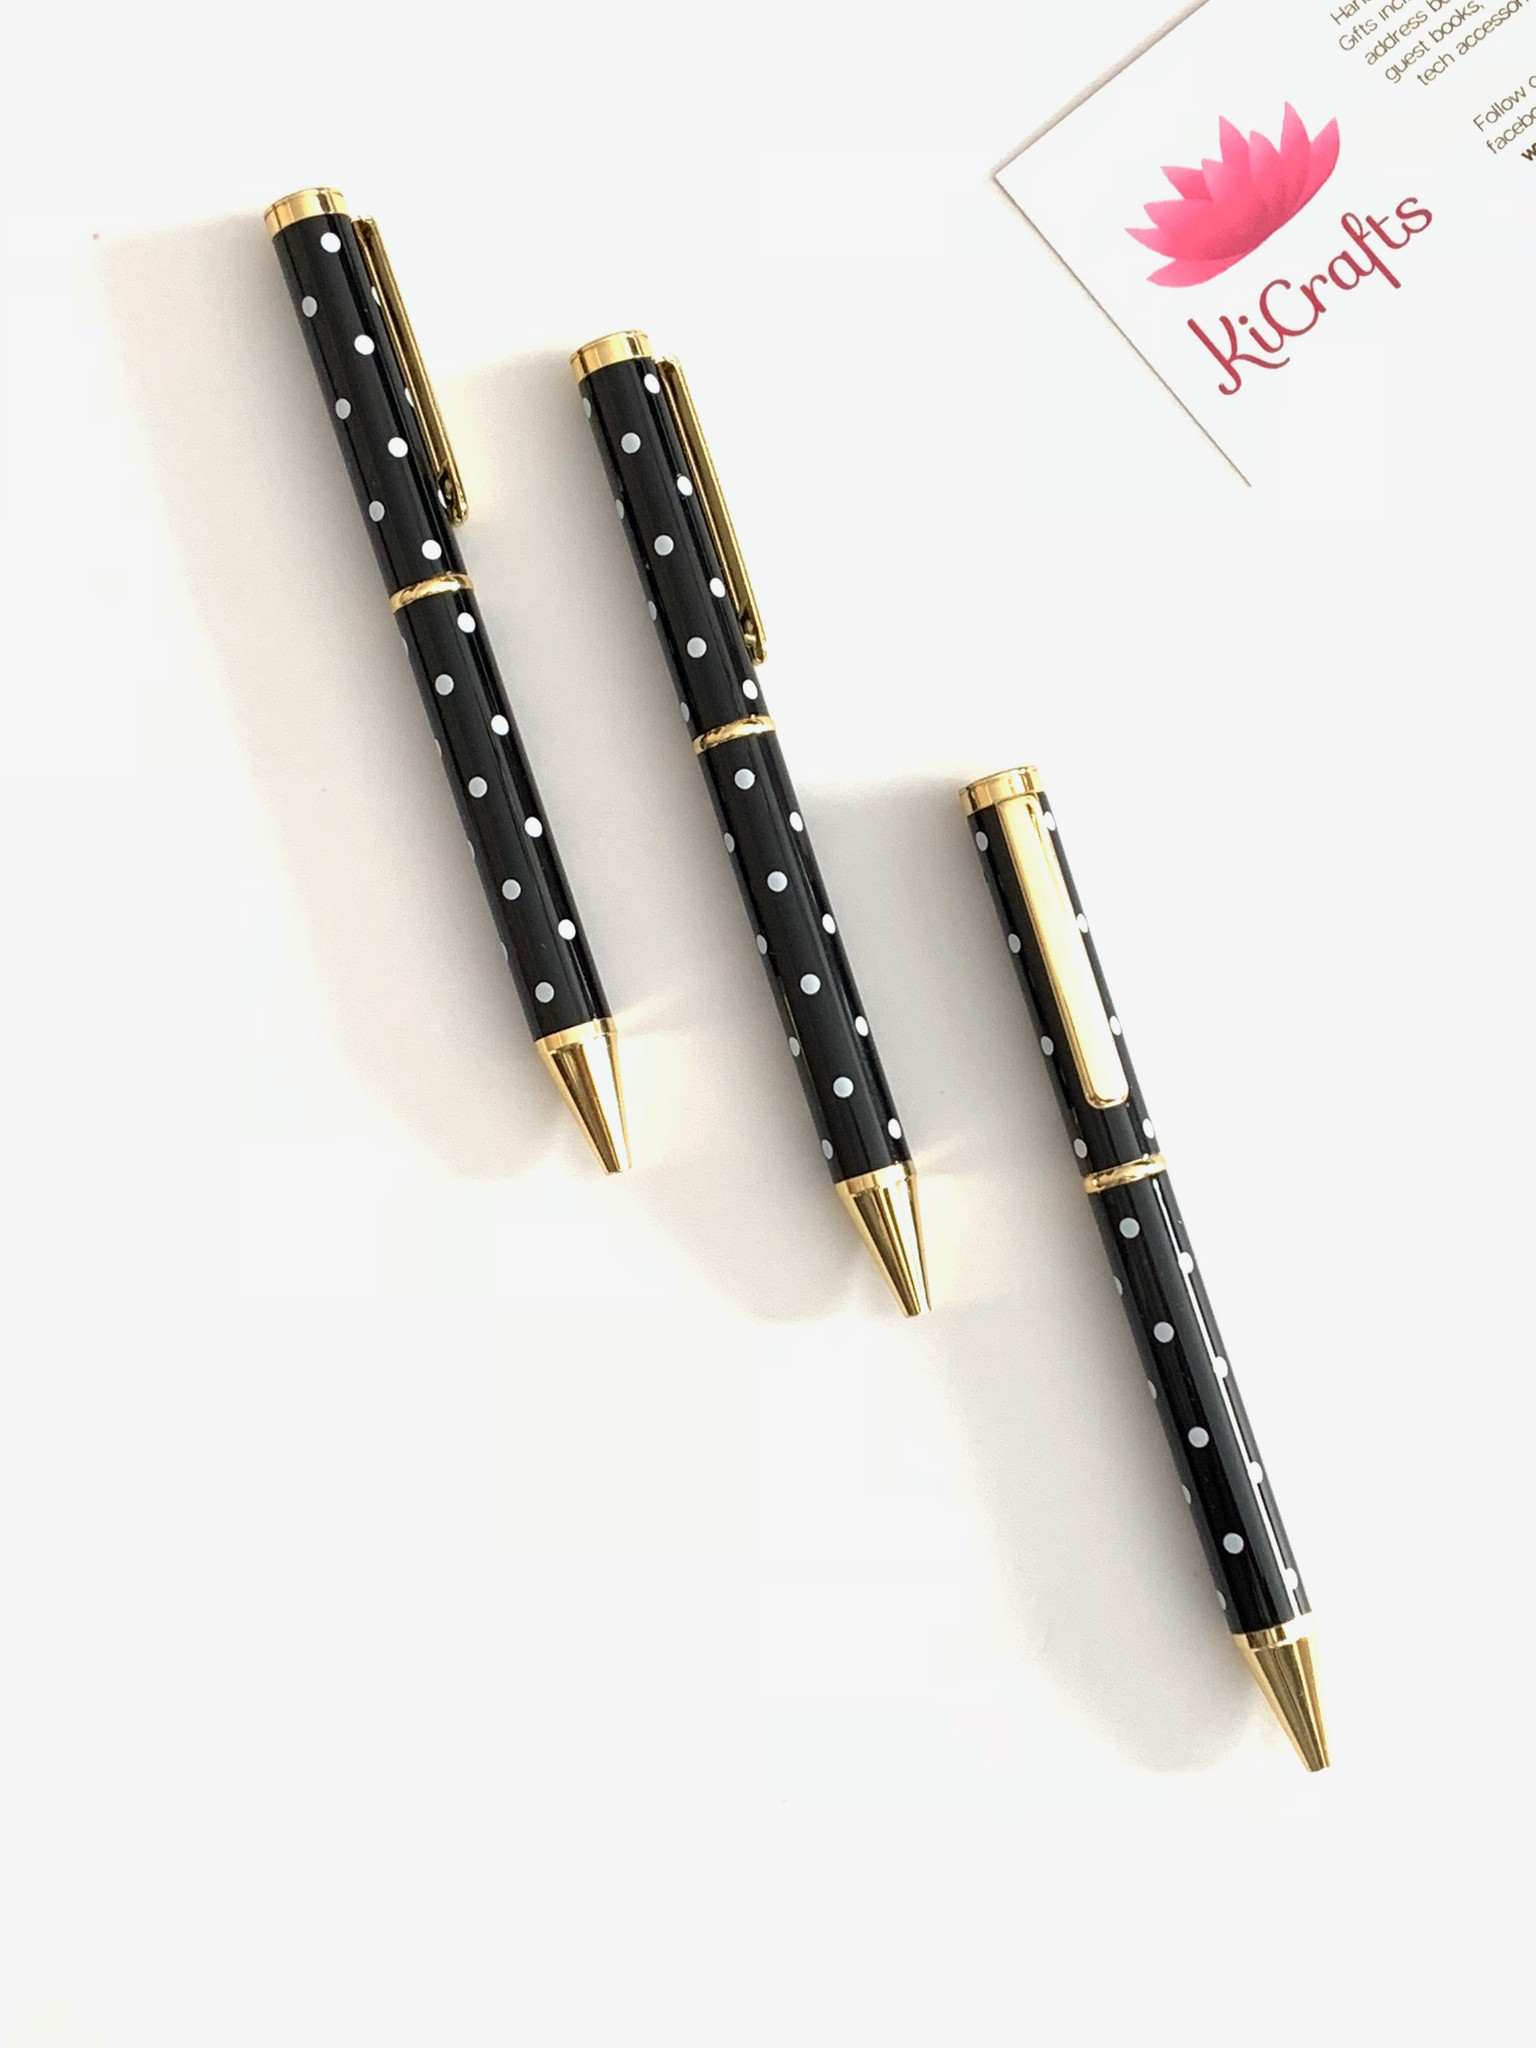 STATIONERY.LIFE POLKA DOTS MULTI COLOR BALL POINT PEN